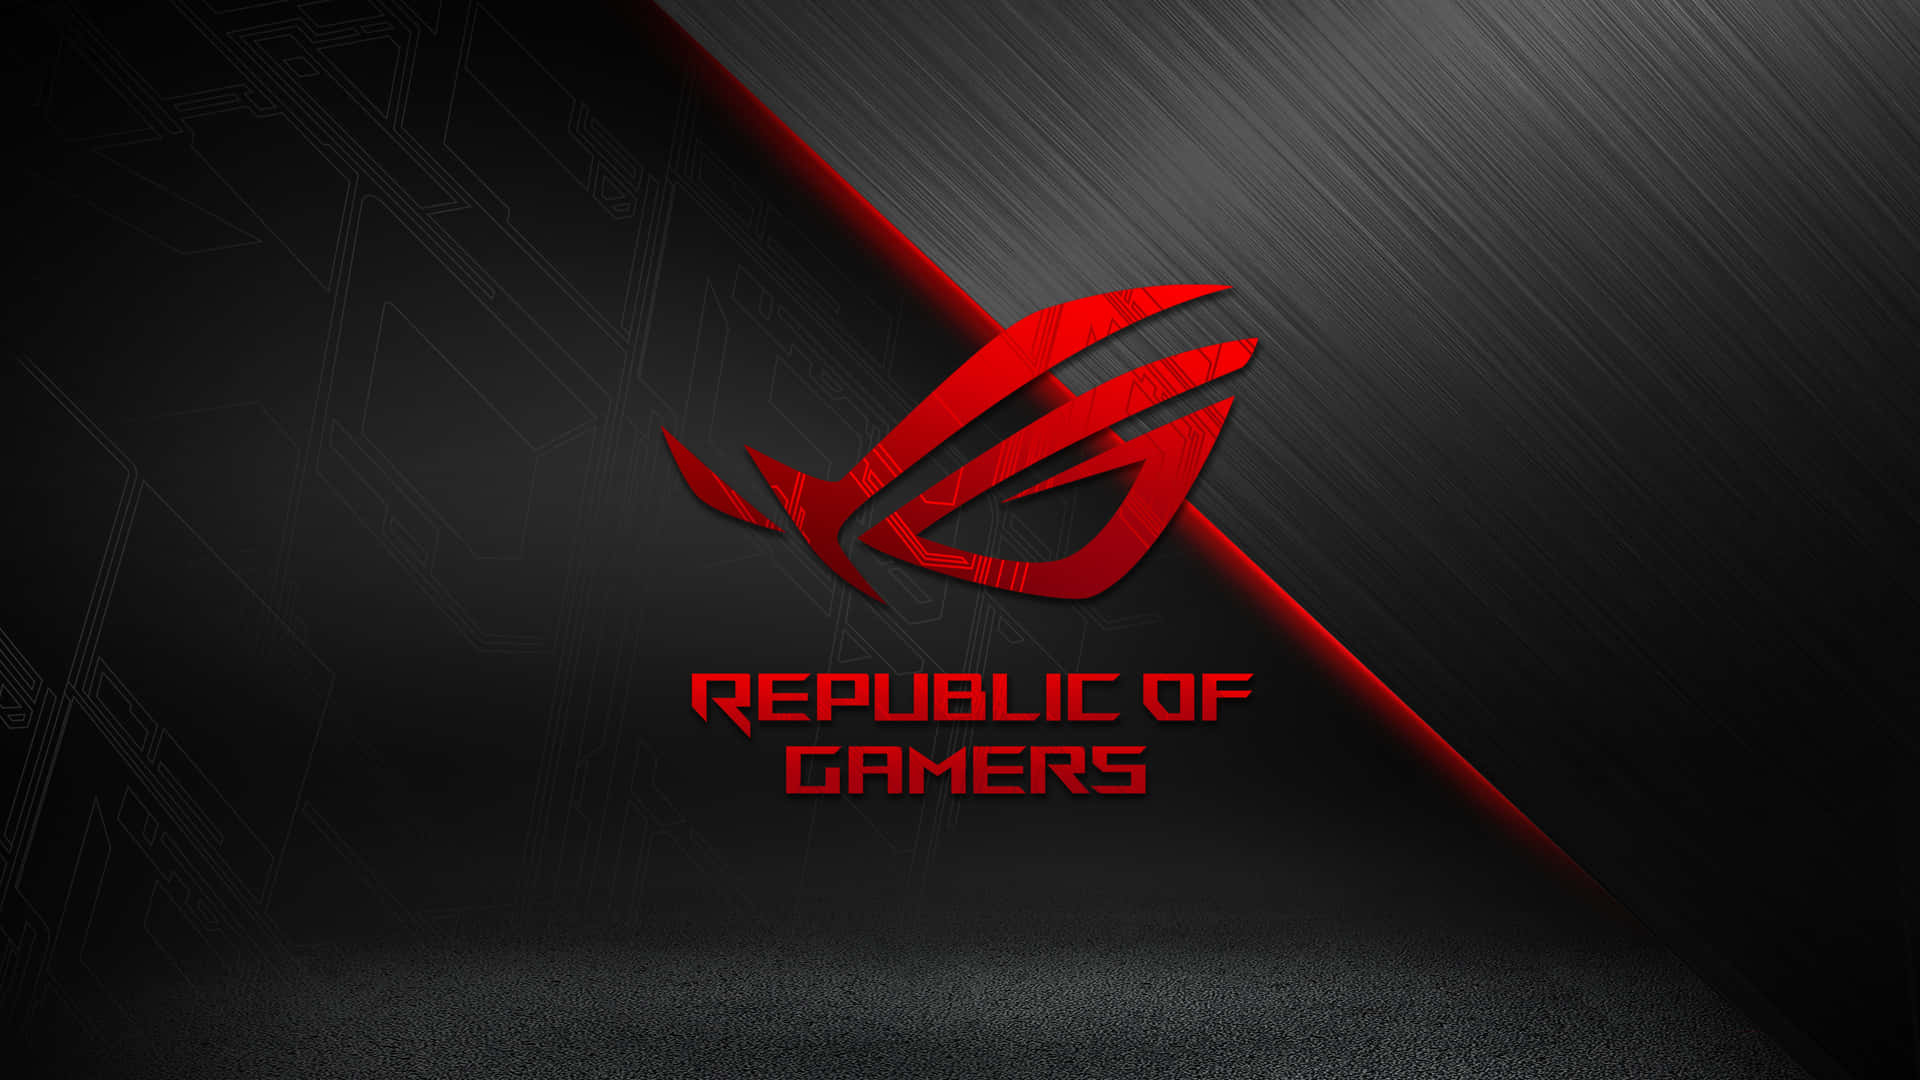 Join the Republic of Gamers with #Rog